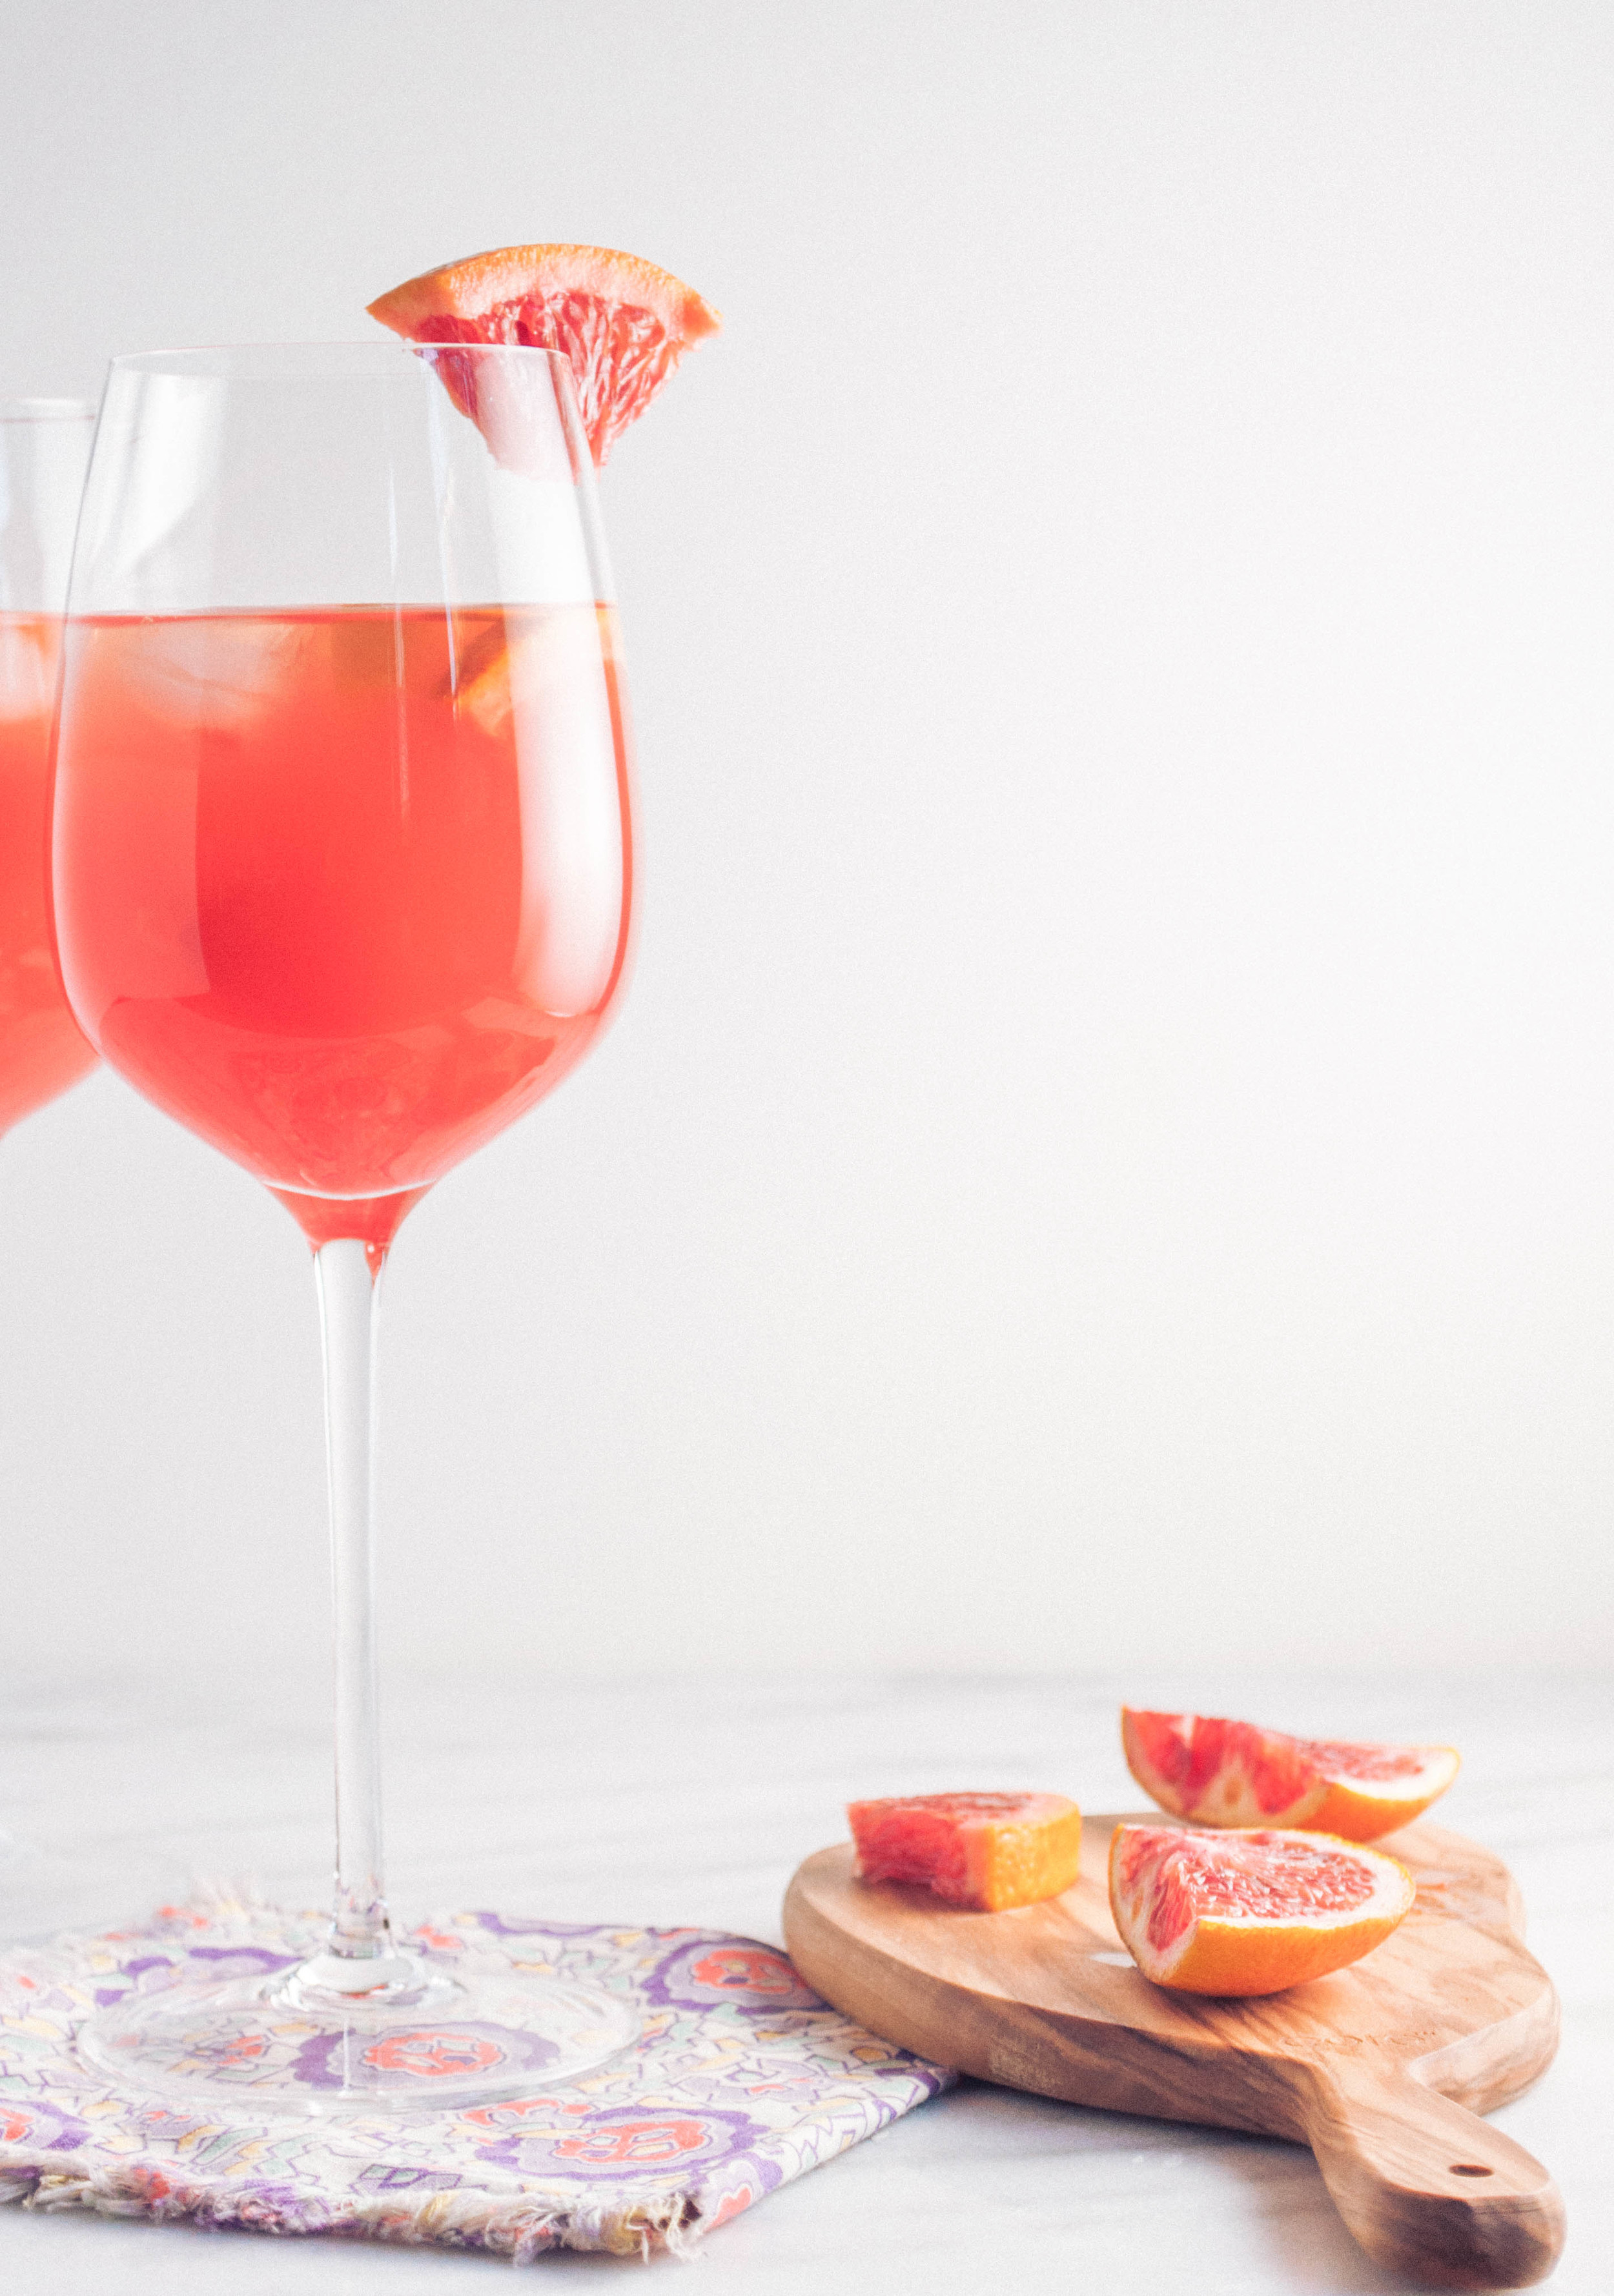 Summerfield Delight | Winter Blood Orange Sangria with White Wine and Rhubarb by AITA